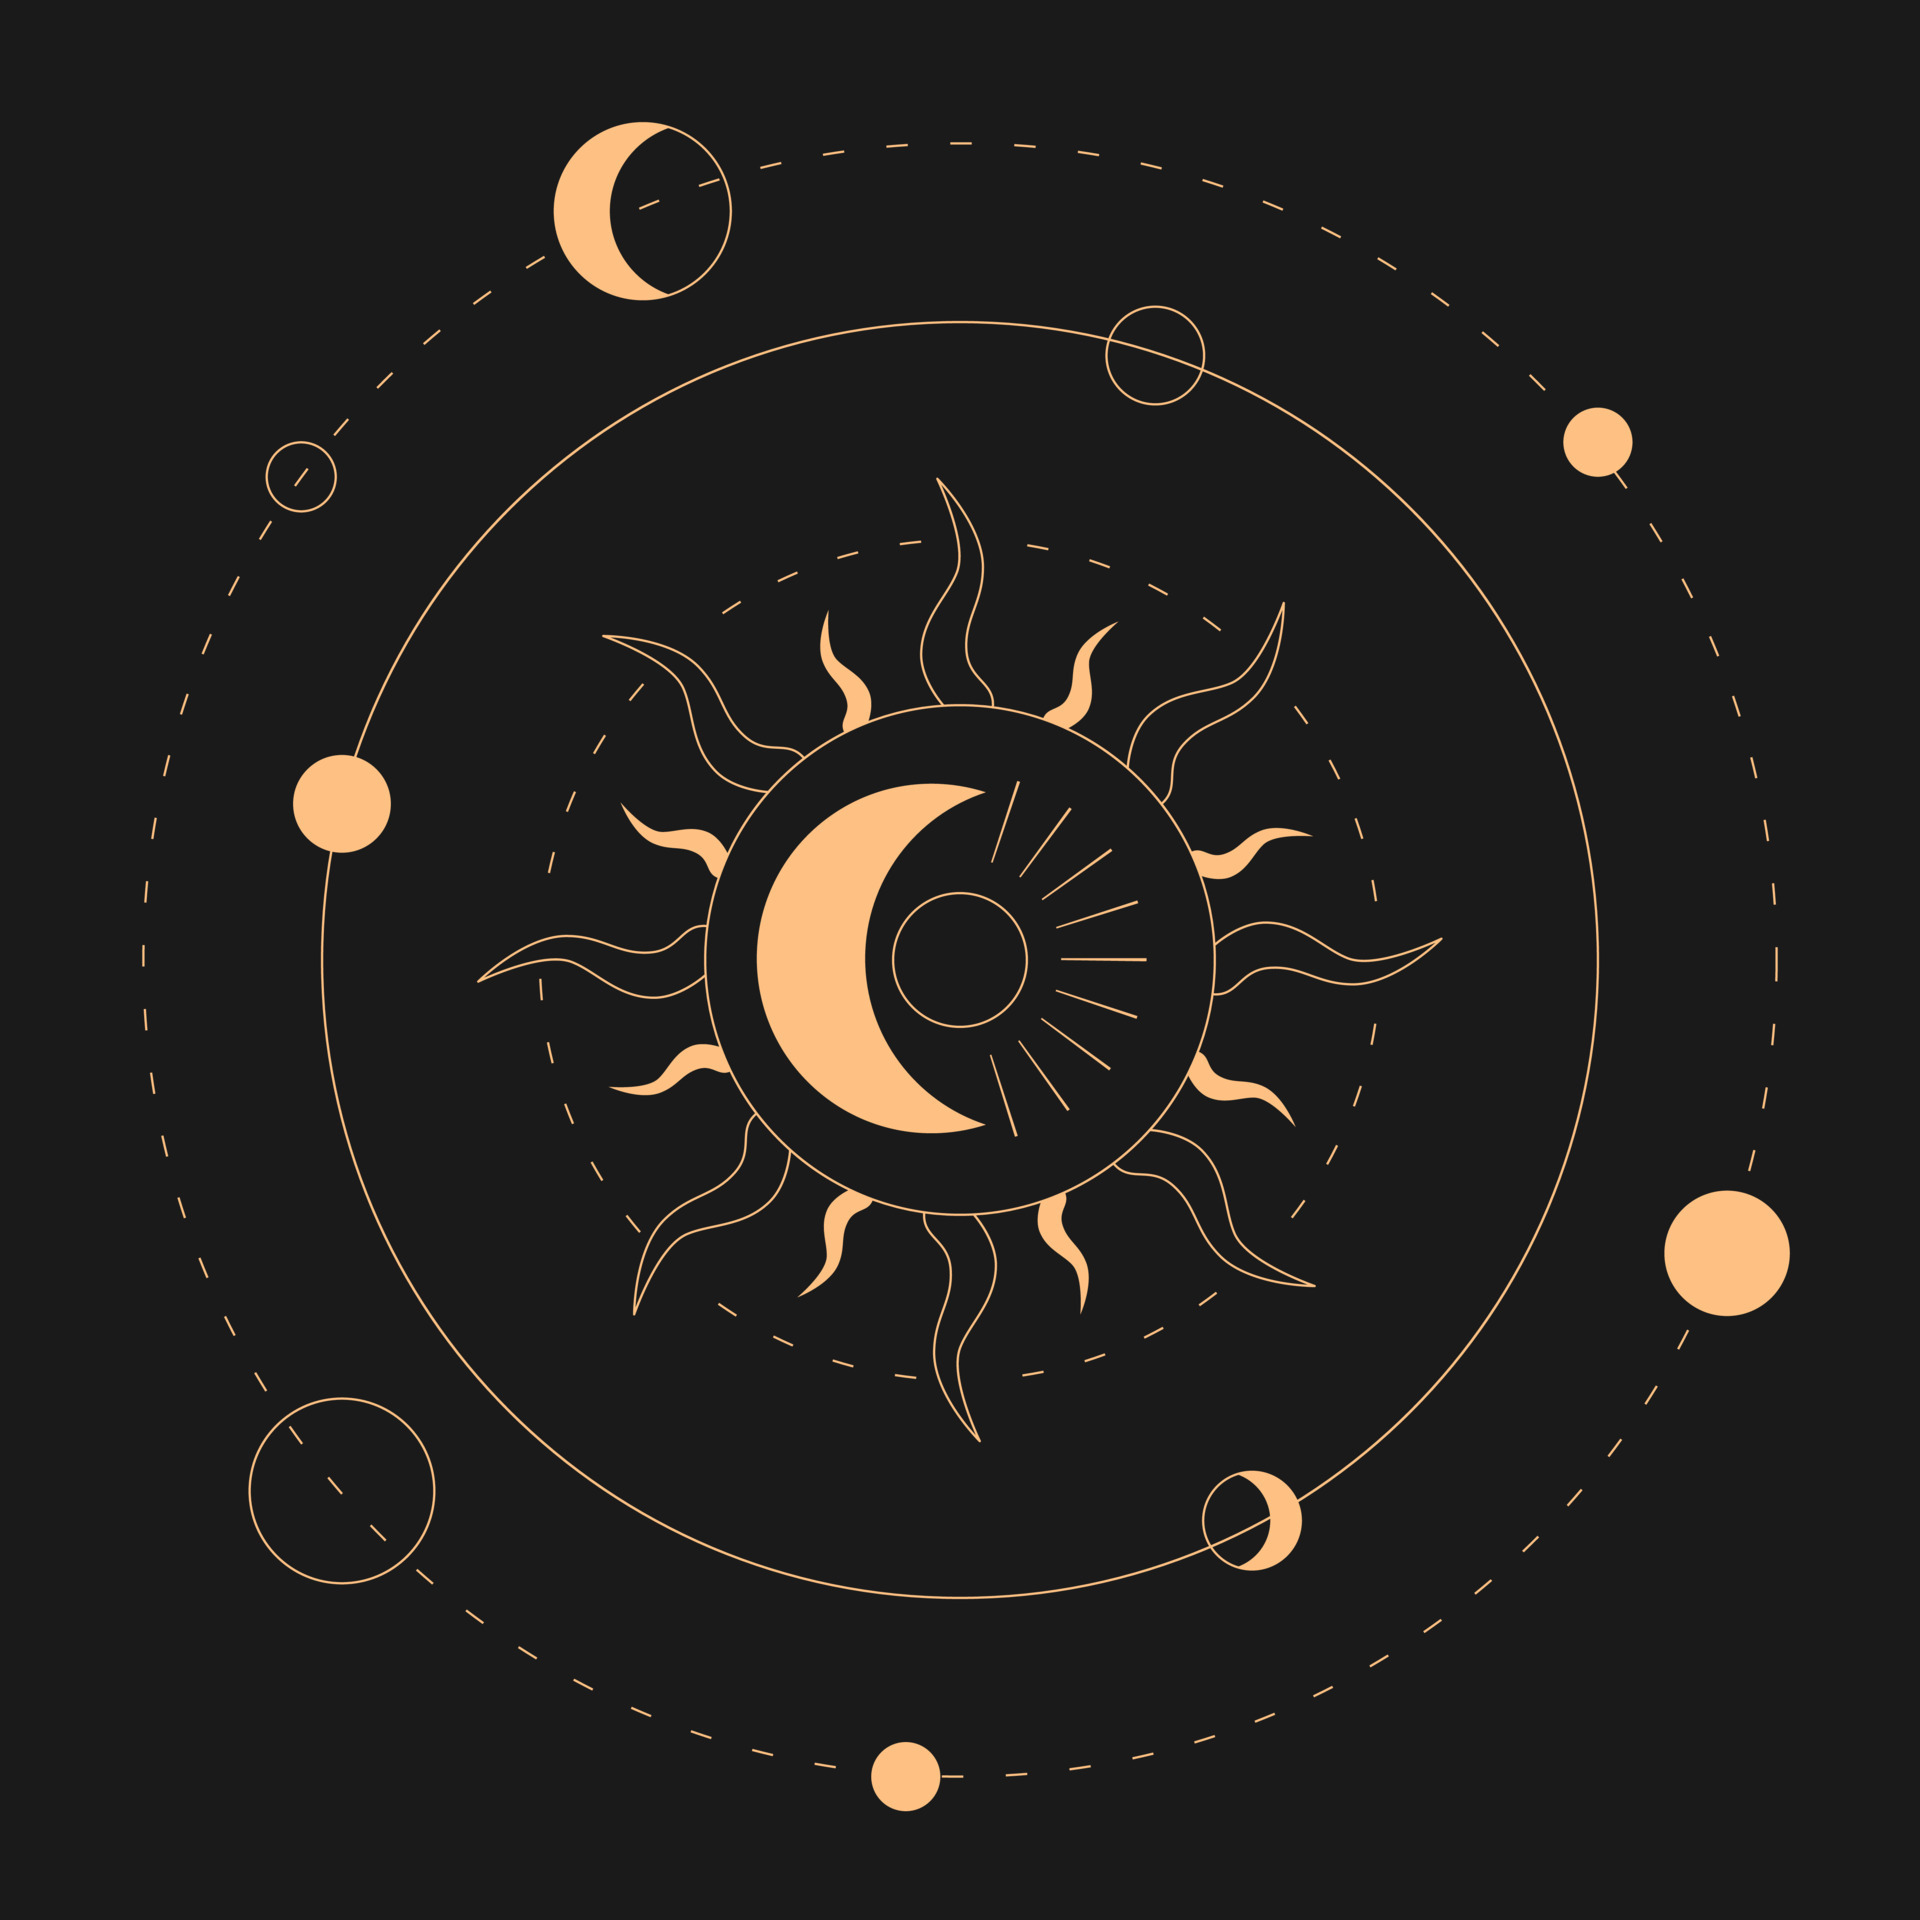 Recherche de RP Celestial-sun-and-moon-magical-banner-for-astrology-celestial-alchemy-device-of-the-universe-crescent-sun-with-the-moon-and-planets-on-a-black-background-esoteric-illustration-vector